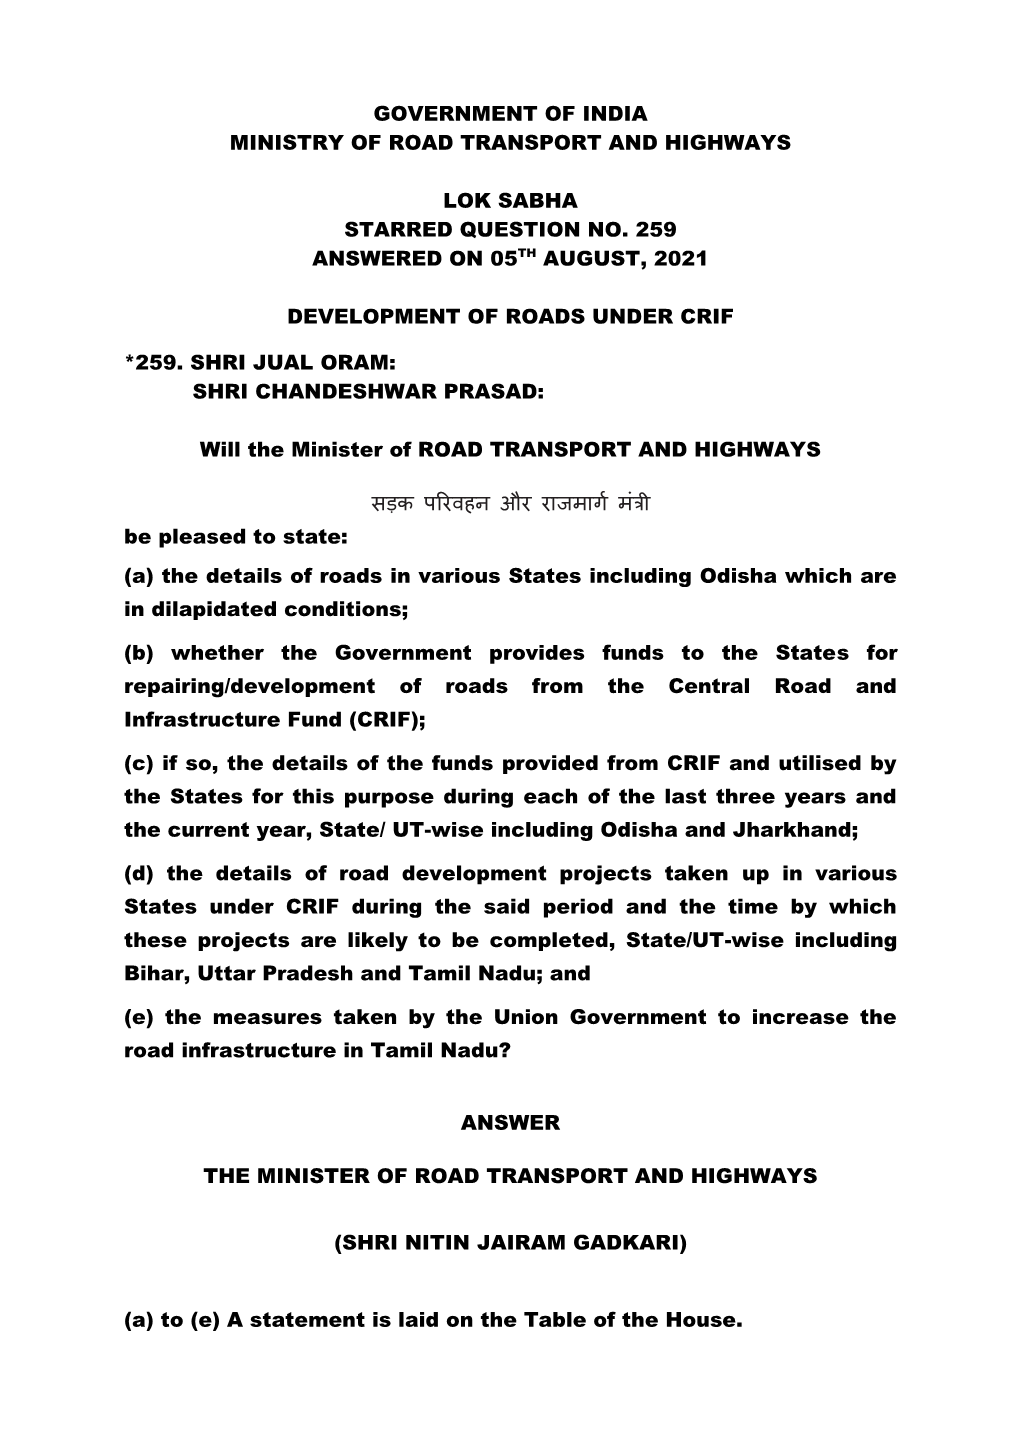 Government of India Ministry of Road Transport and Highways